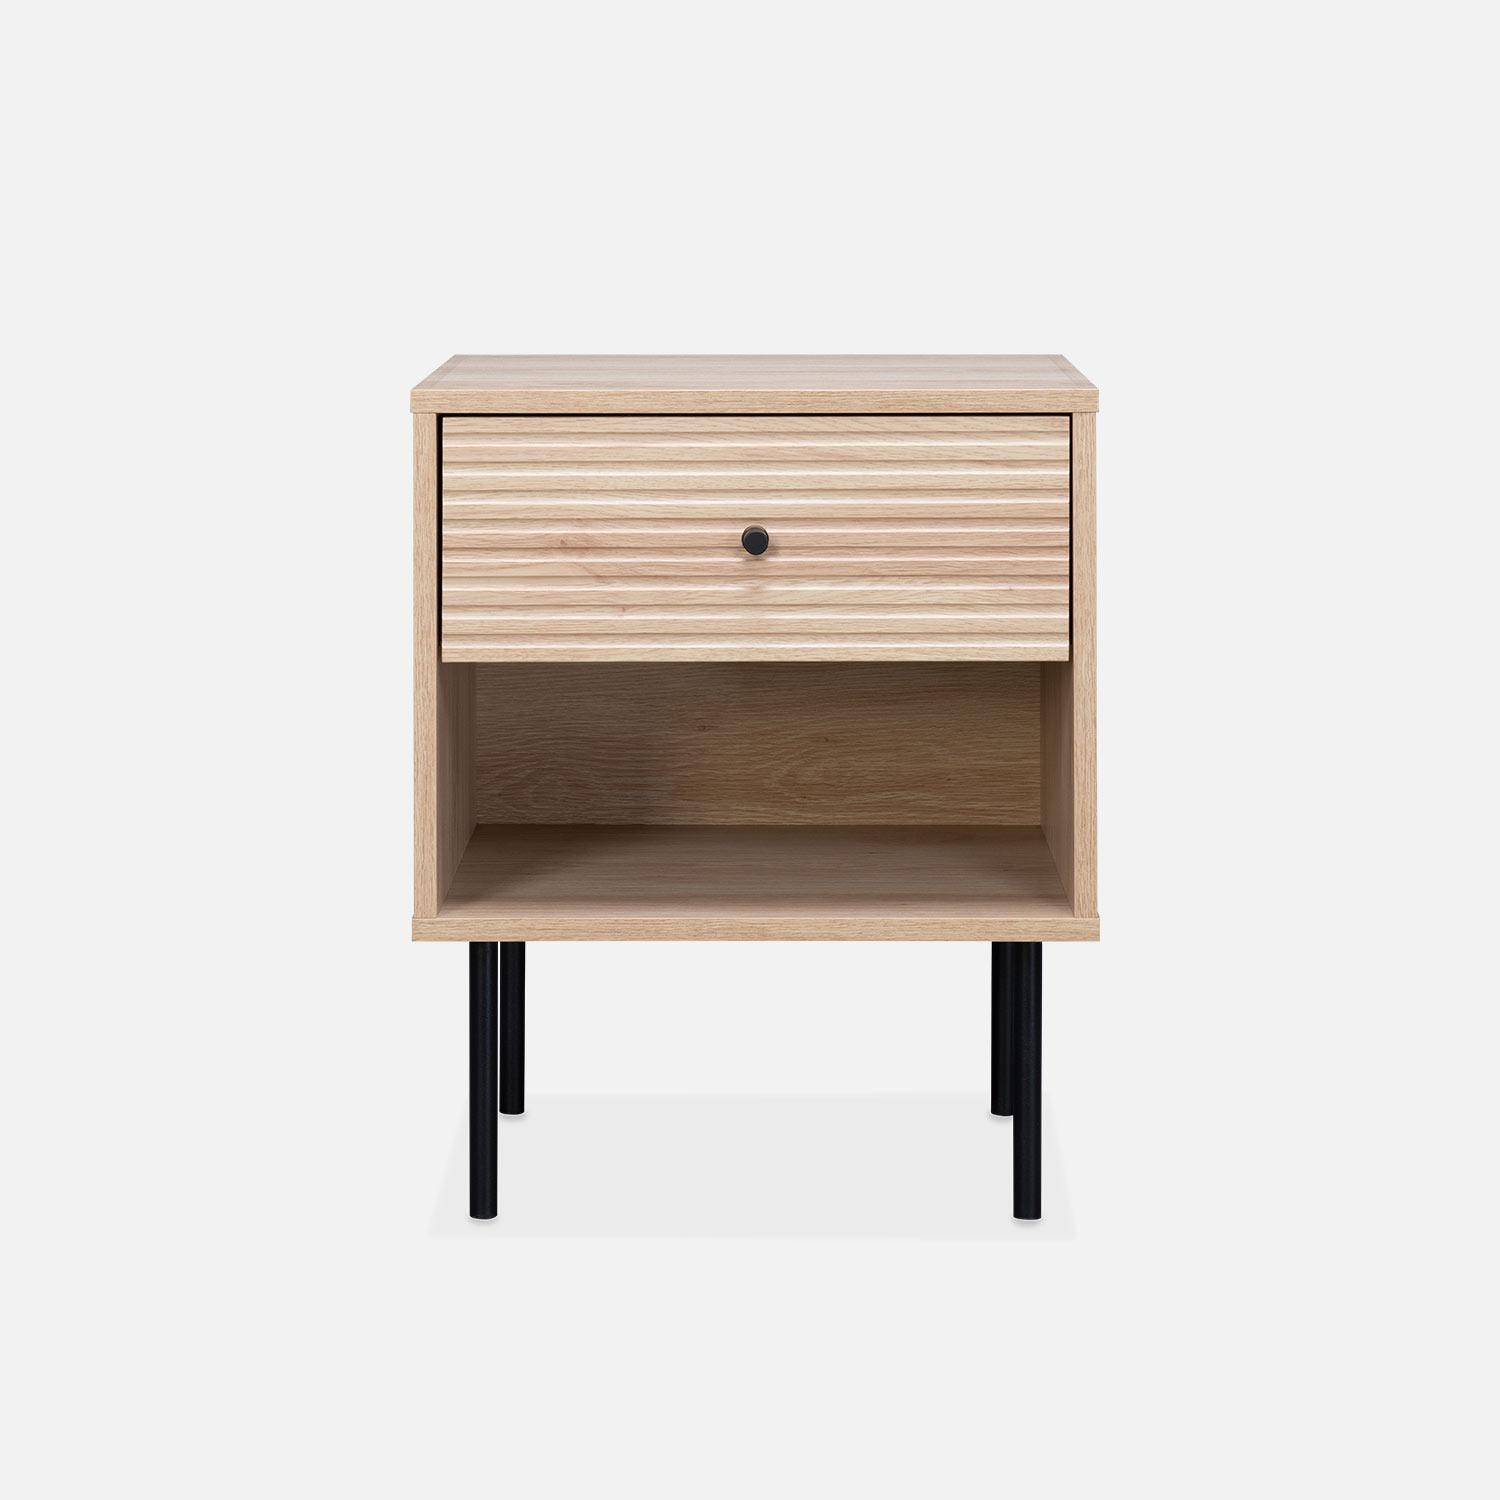 Grooved wood-effect bedside table, 45x39.5x55cm - Braga - Natural wood colour,sweeek,Photo4